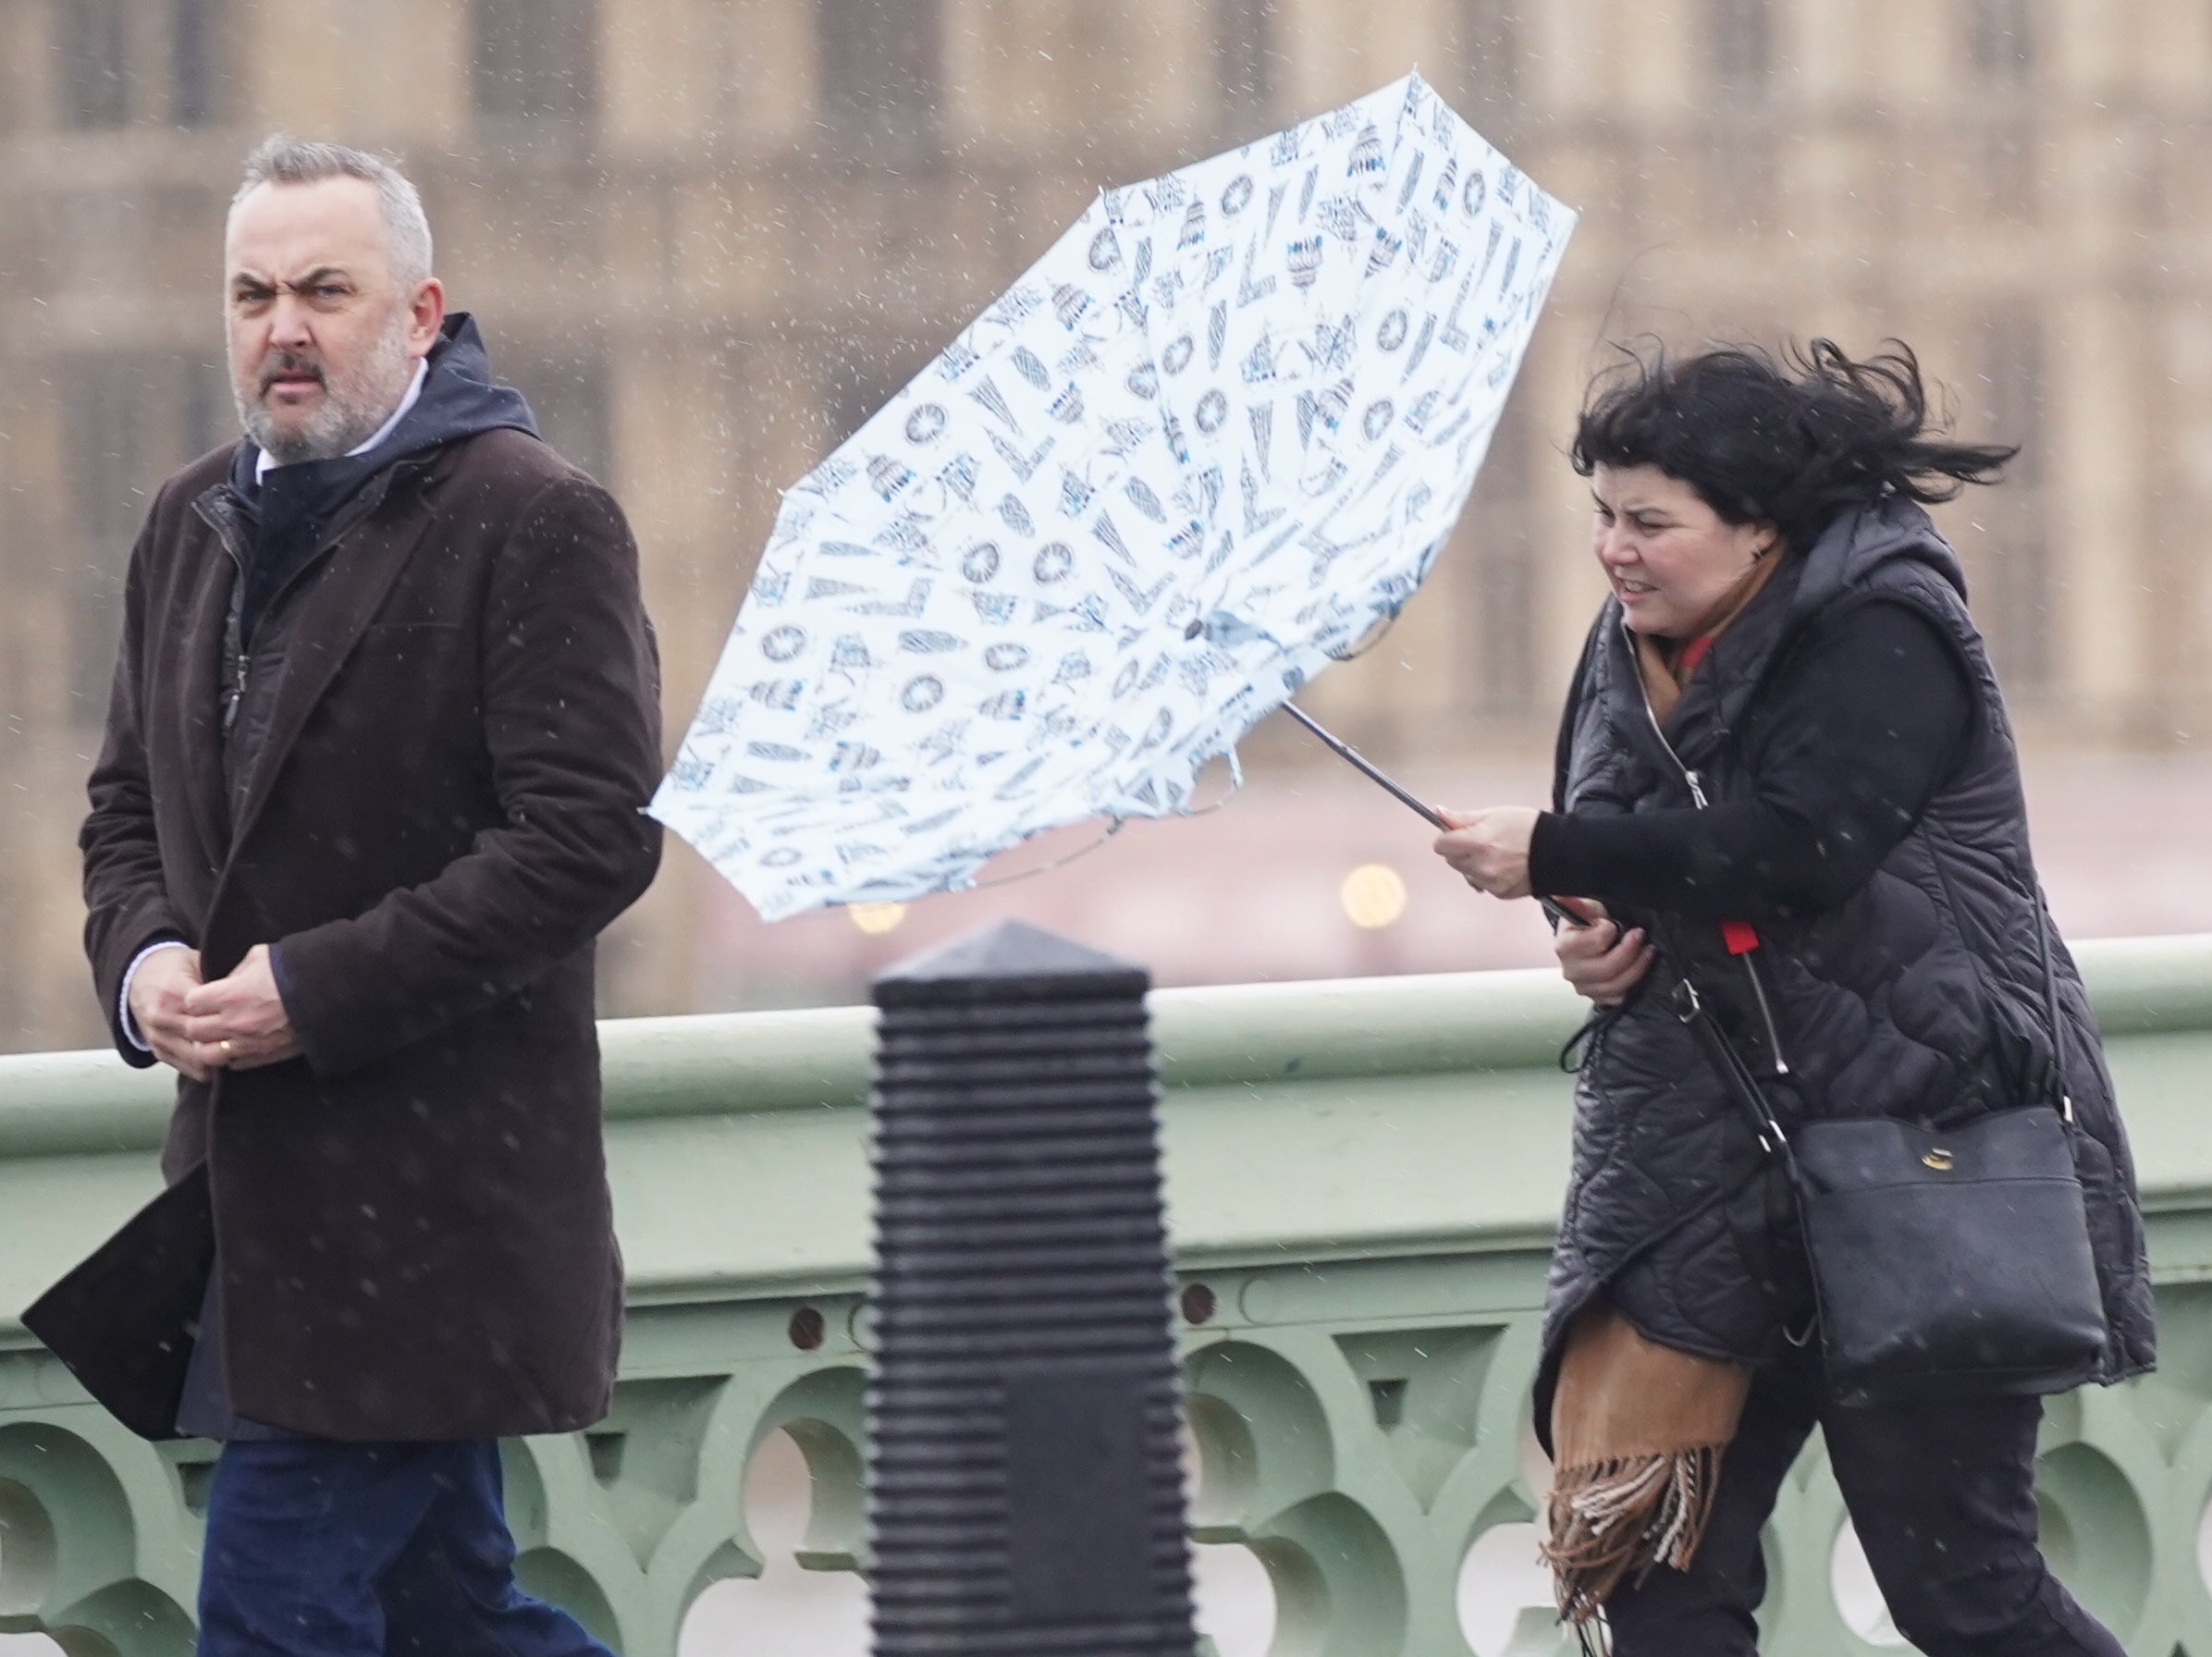 A woman battles with her umbrella on Westminster Bridge, London, in high winds and rain in the capital on 15 February 2022